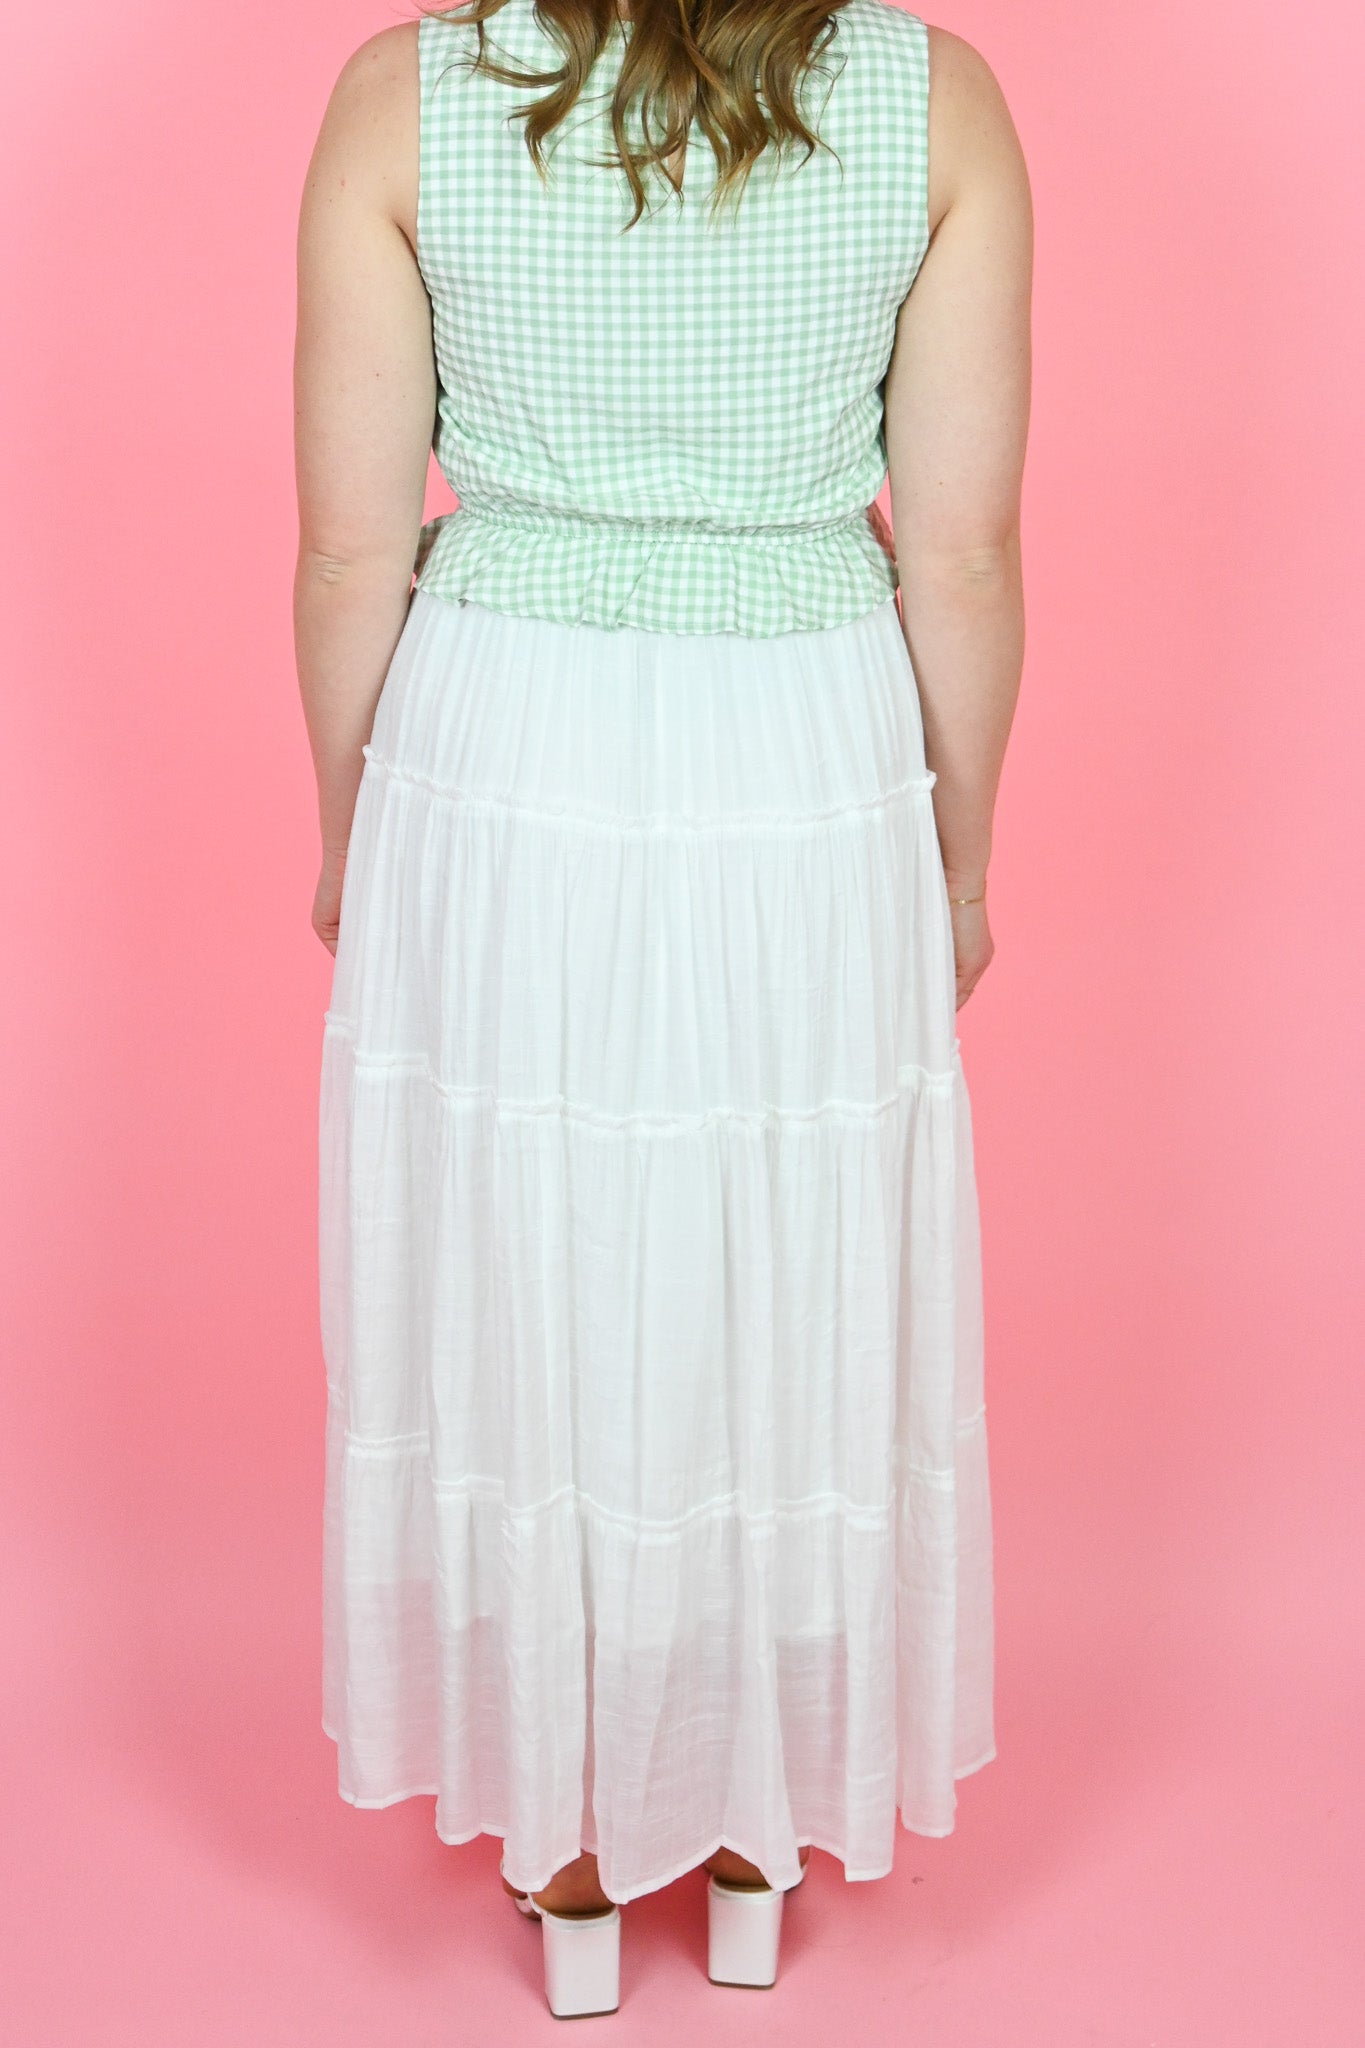 tiered white skirt with drawstring tie